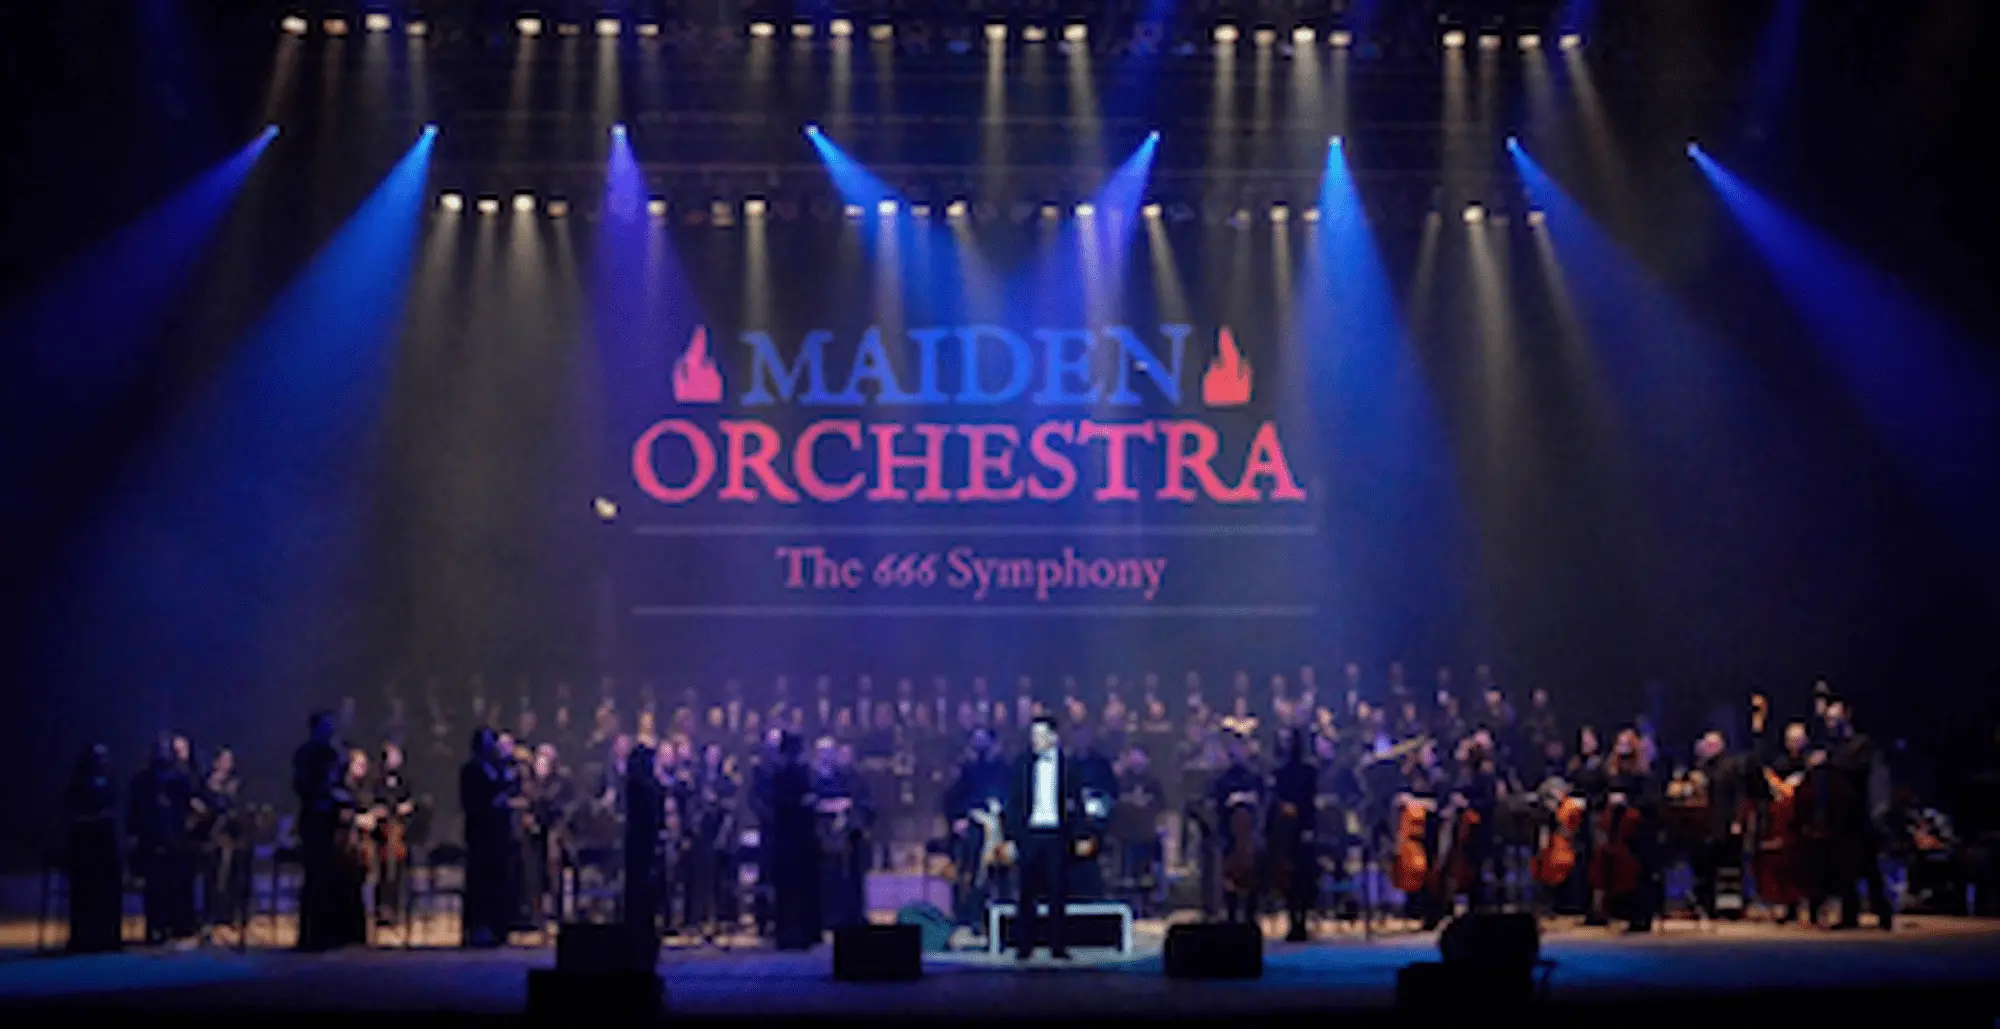 Maiden Orchestra “The 666 Symphony”